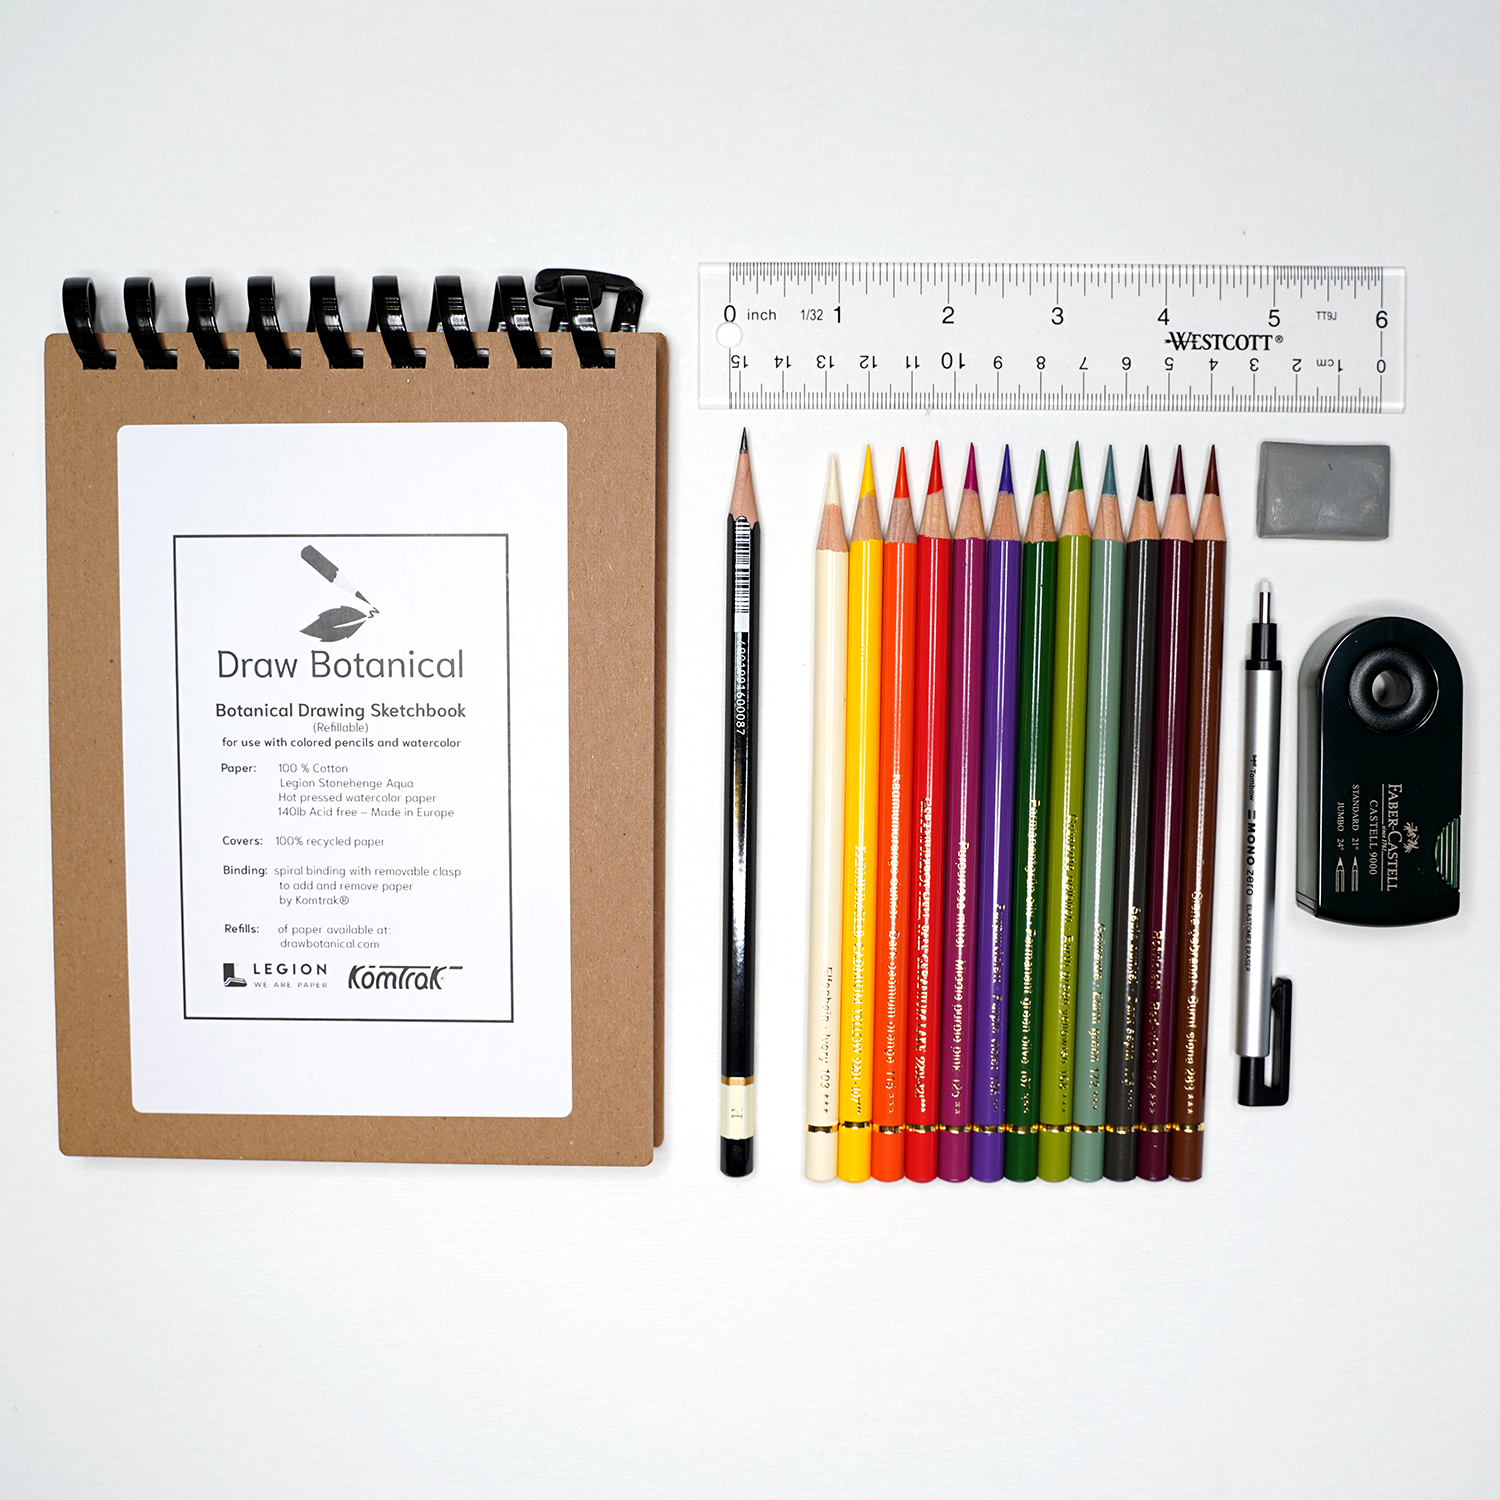 Coloring kit - Notebook and pencils